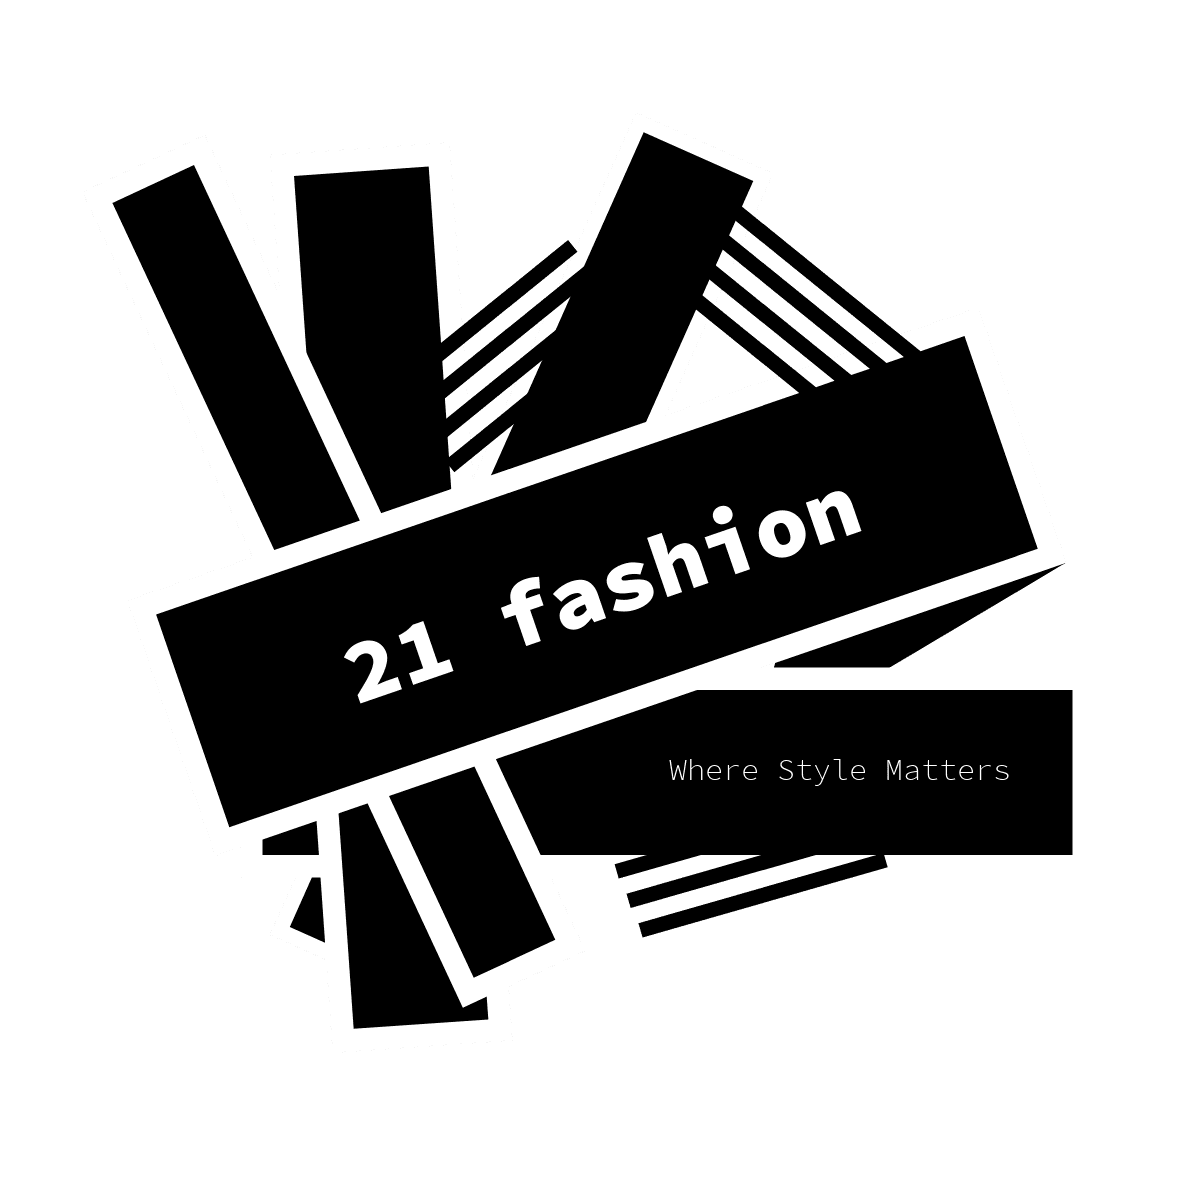 21Fashion is a style of life